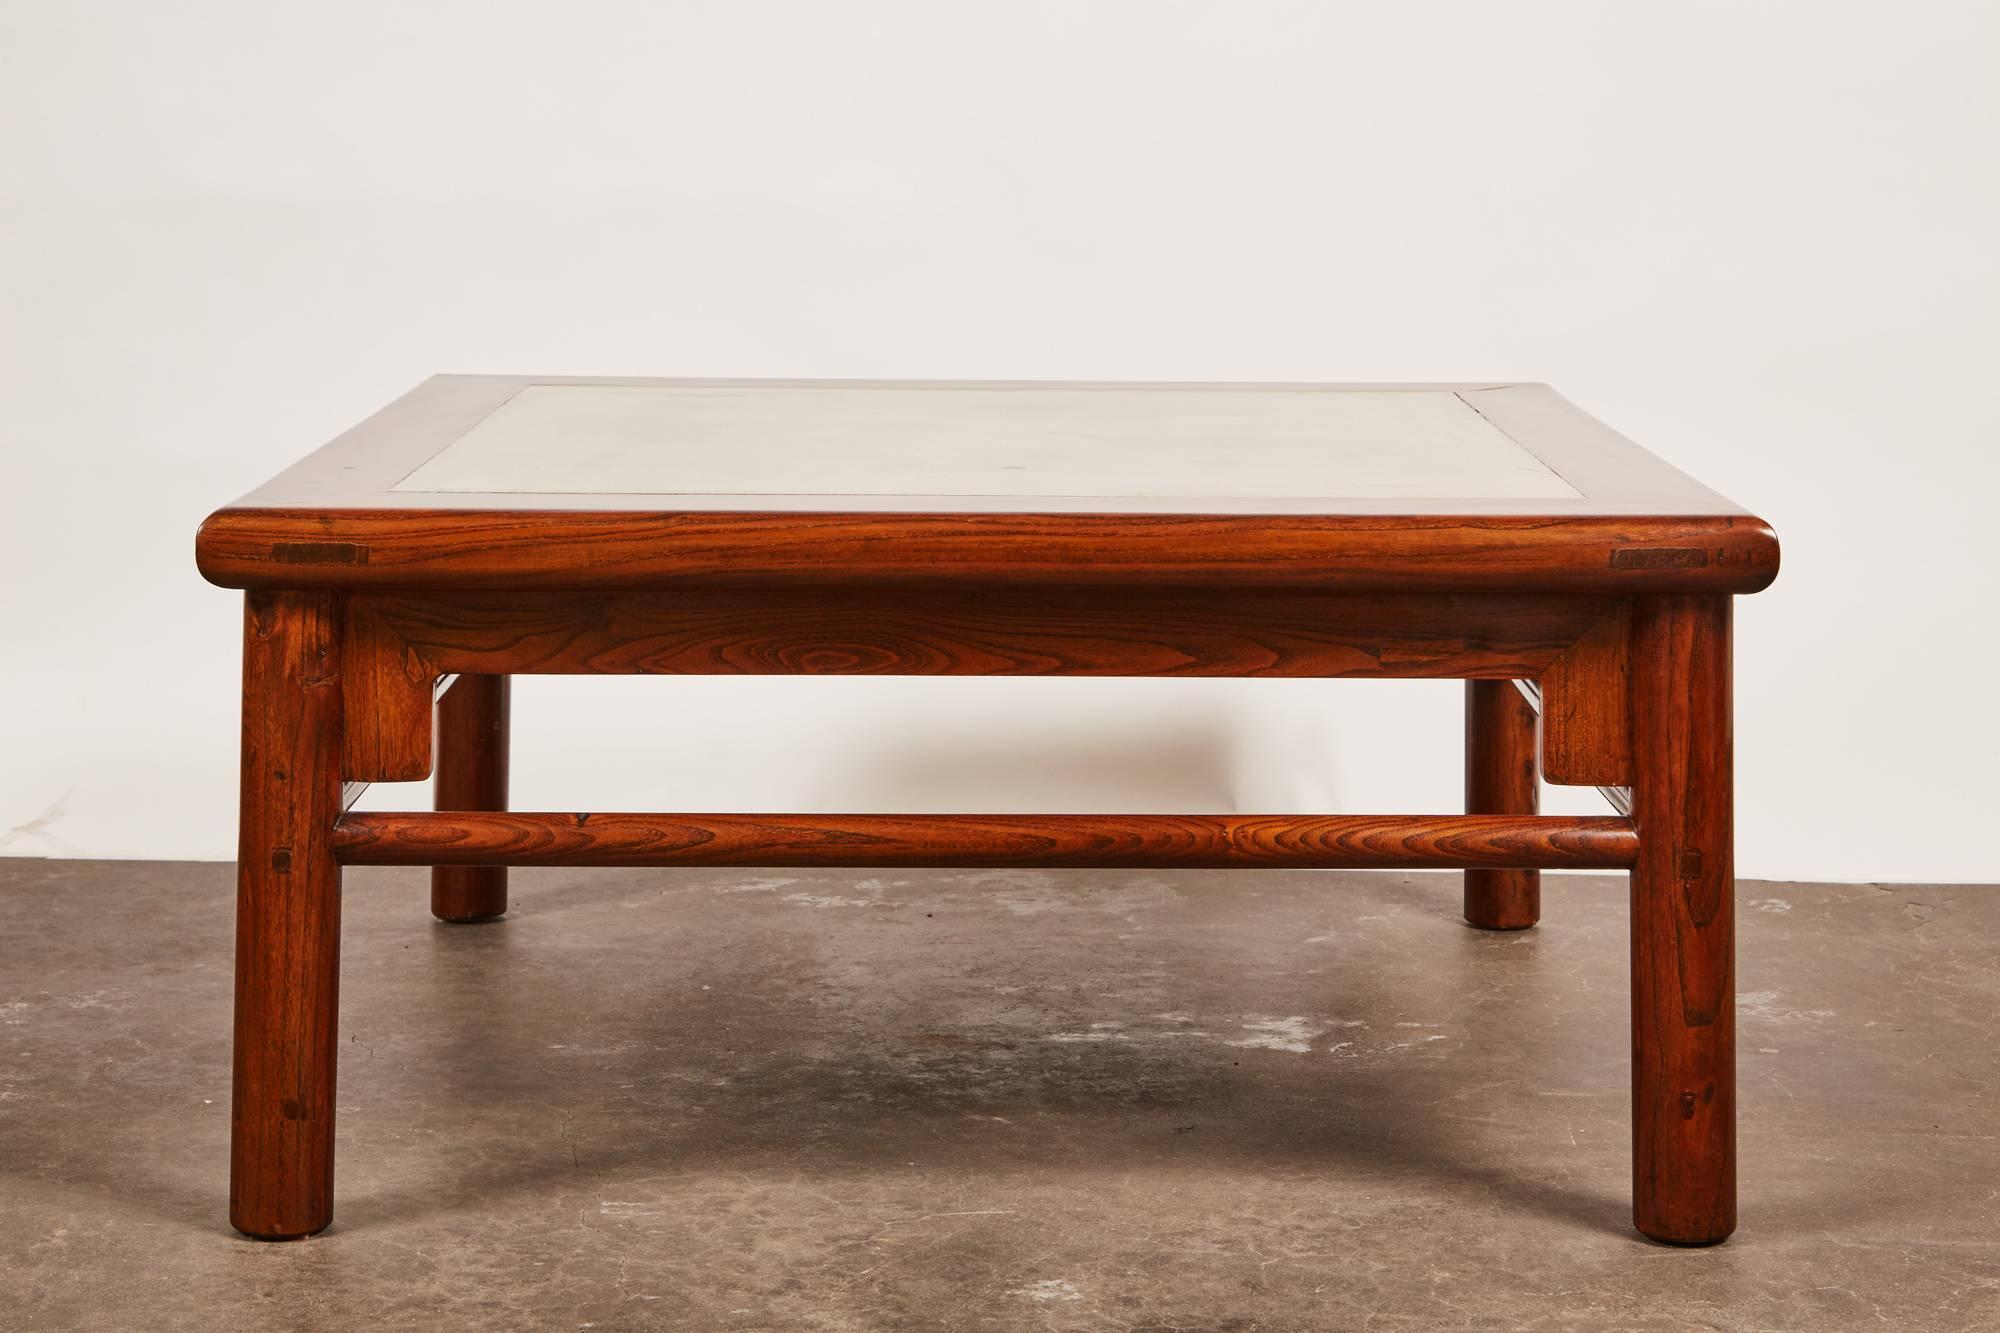 A 20th century Ming style elm coffee table. The table features clean and simple lines with a tabletop that has a center consisting of a green stone.